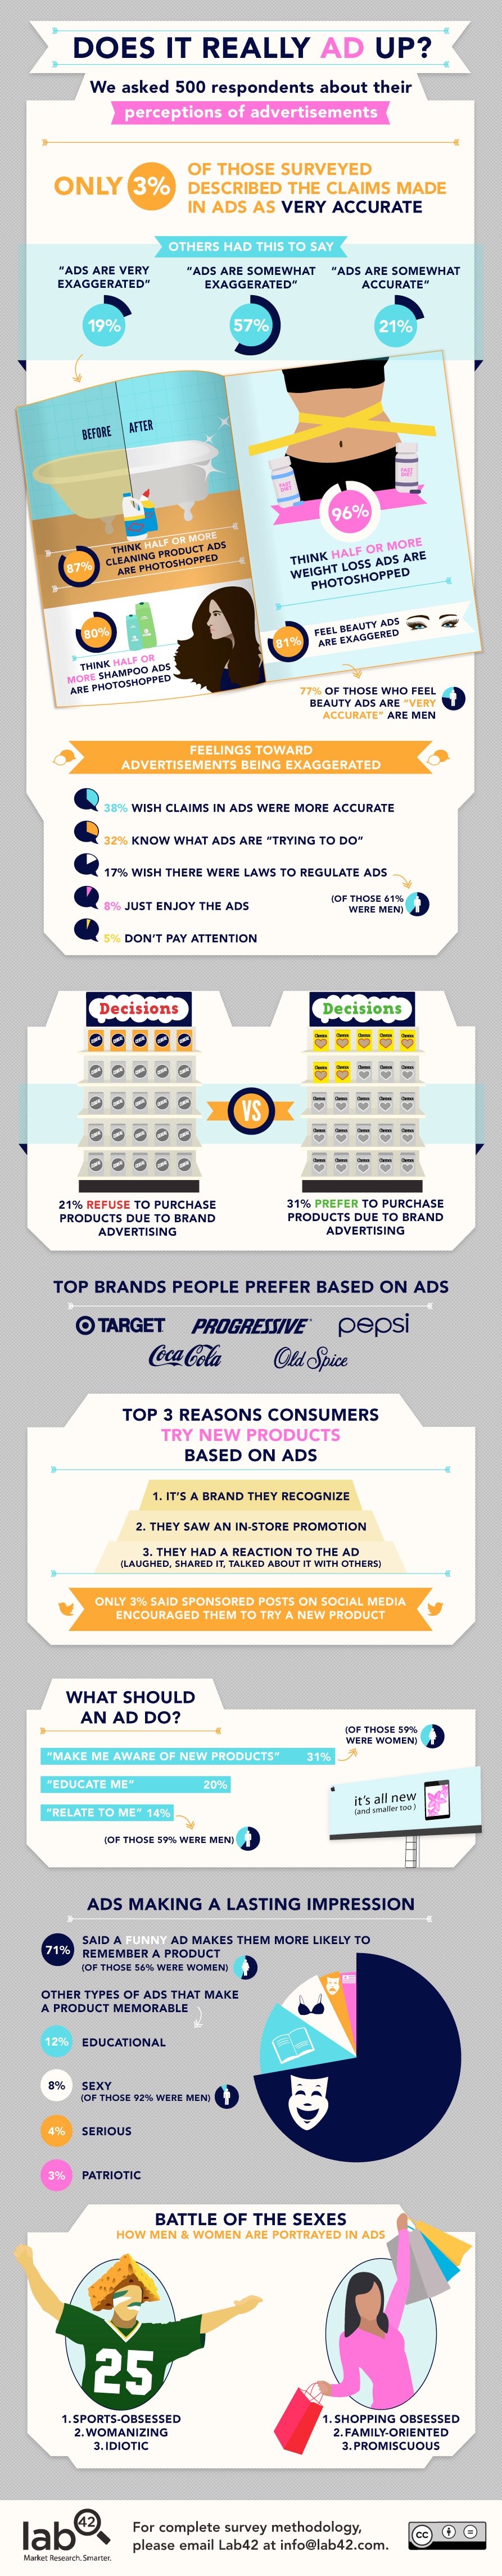 advertising-perception-inaccurate-ads-infographic